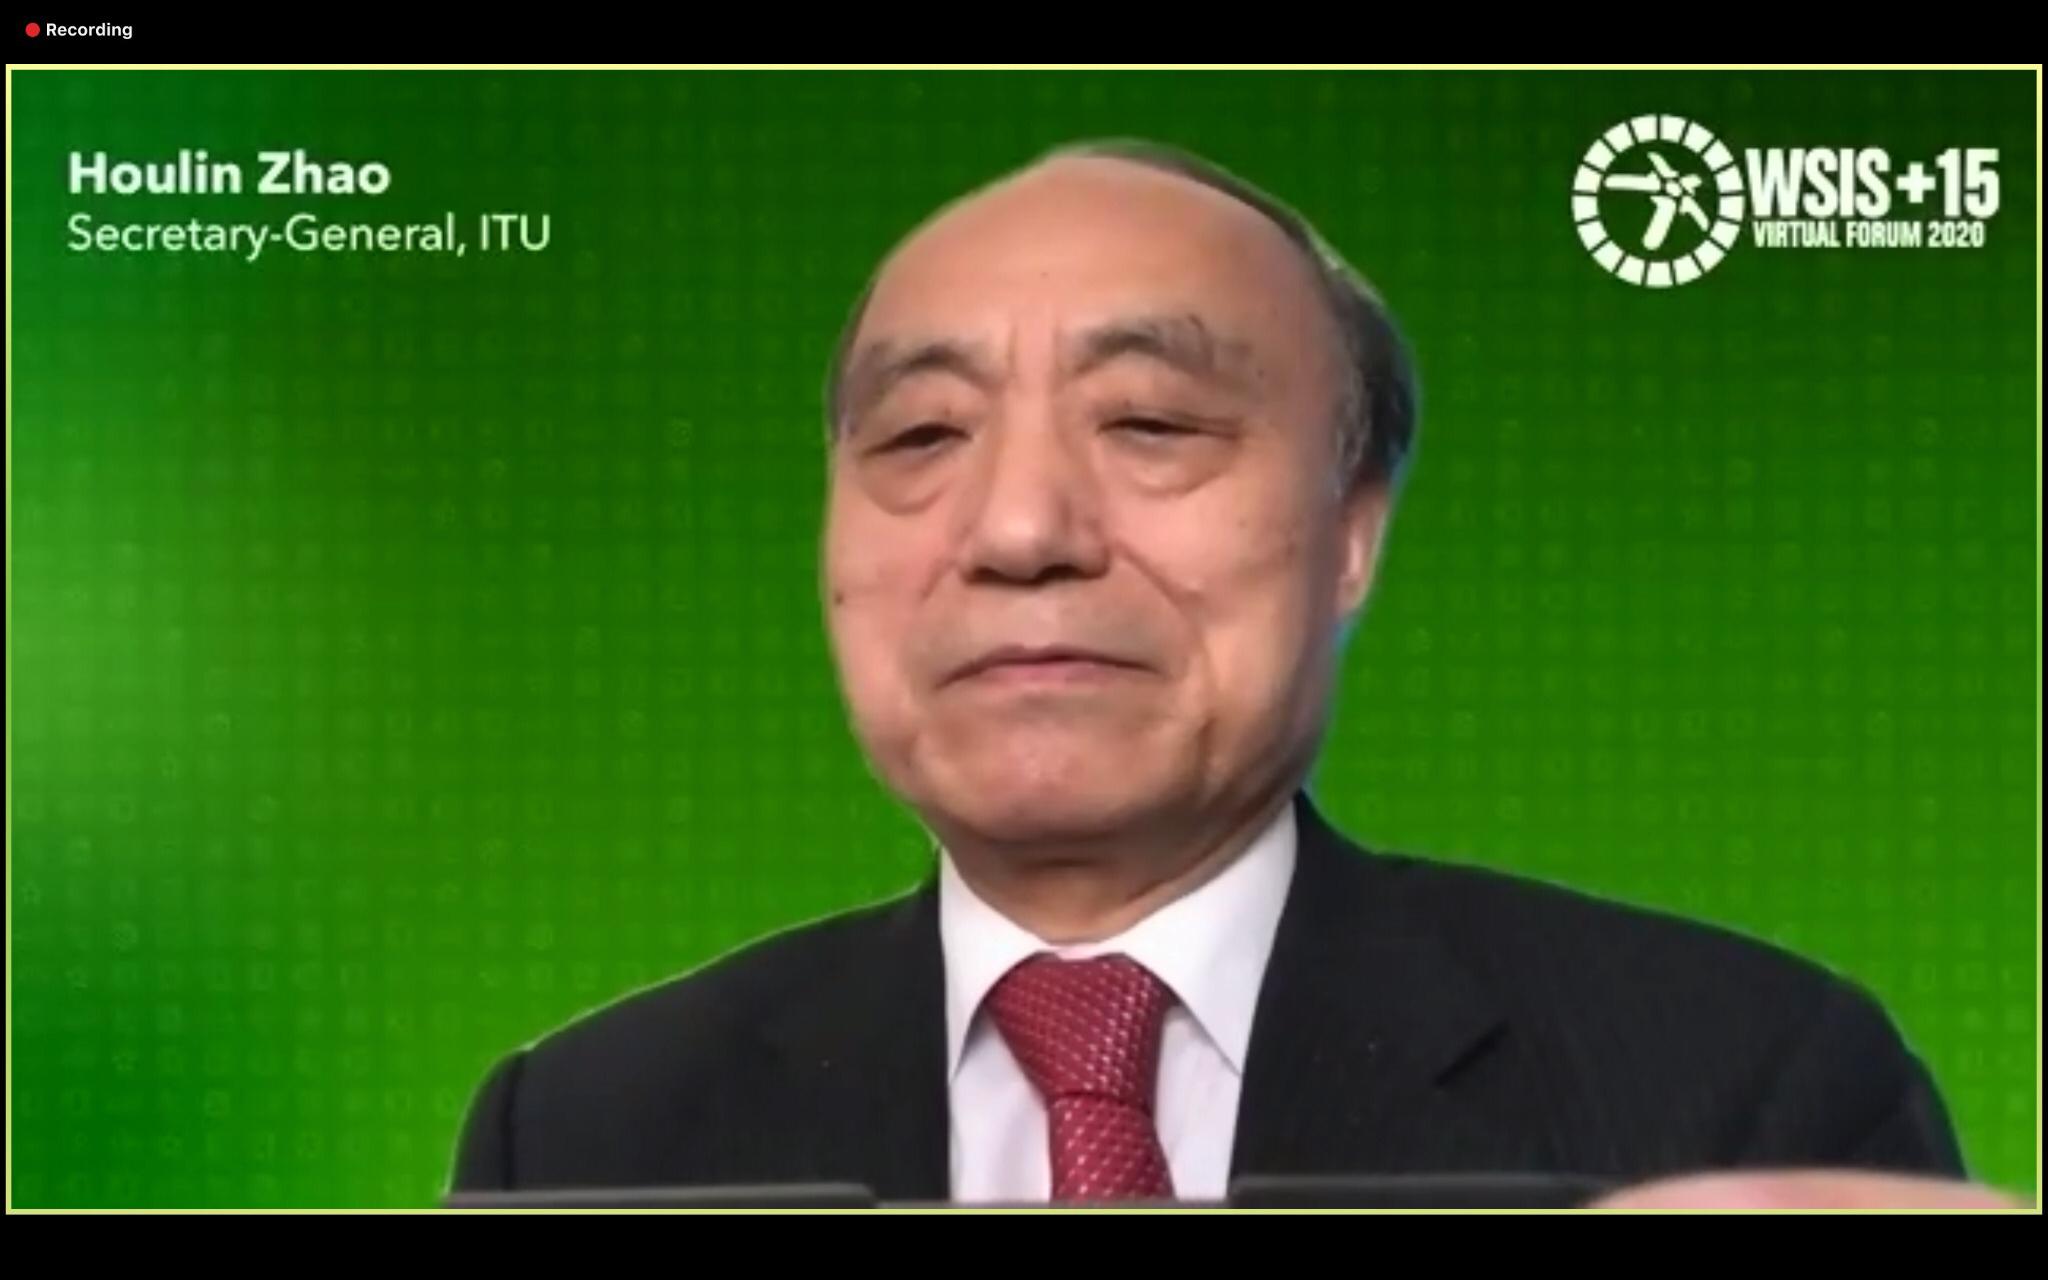 Mr. Houlin Zhao, Secretary-General, ITU at the WSIS Forum 2020 High-Level Opening Ceremony